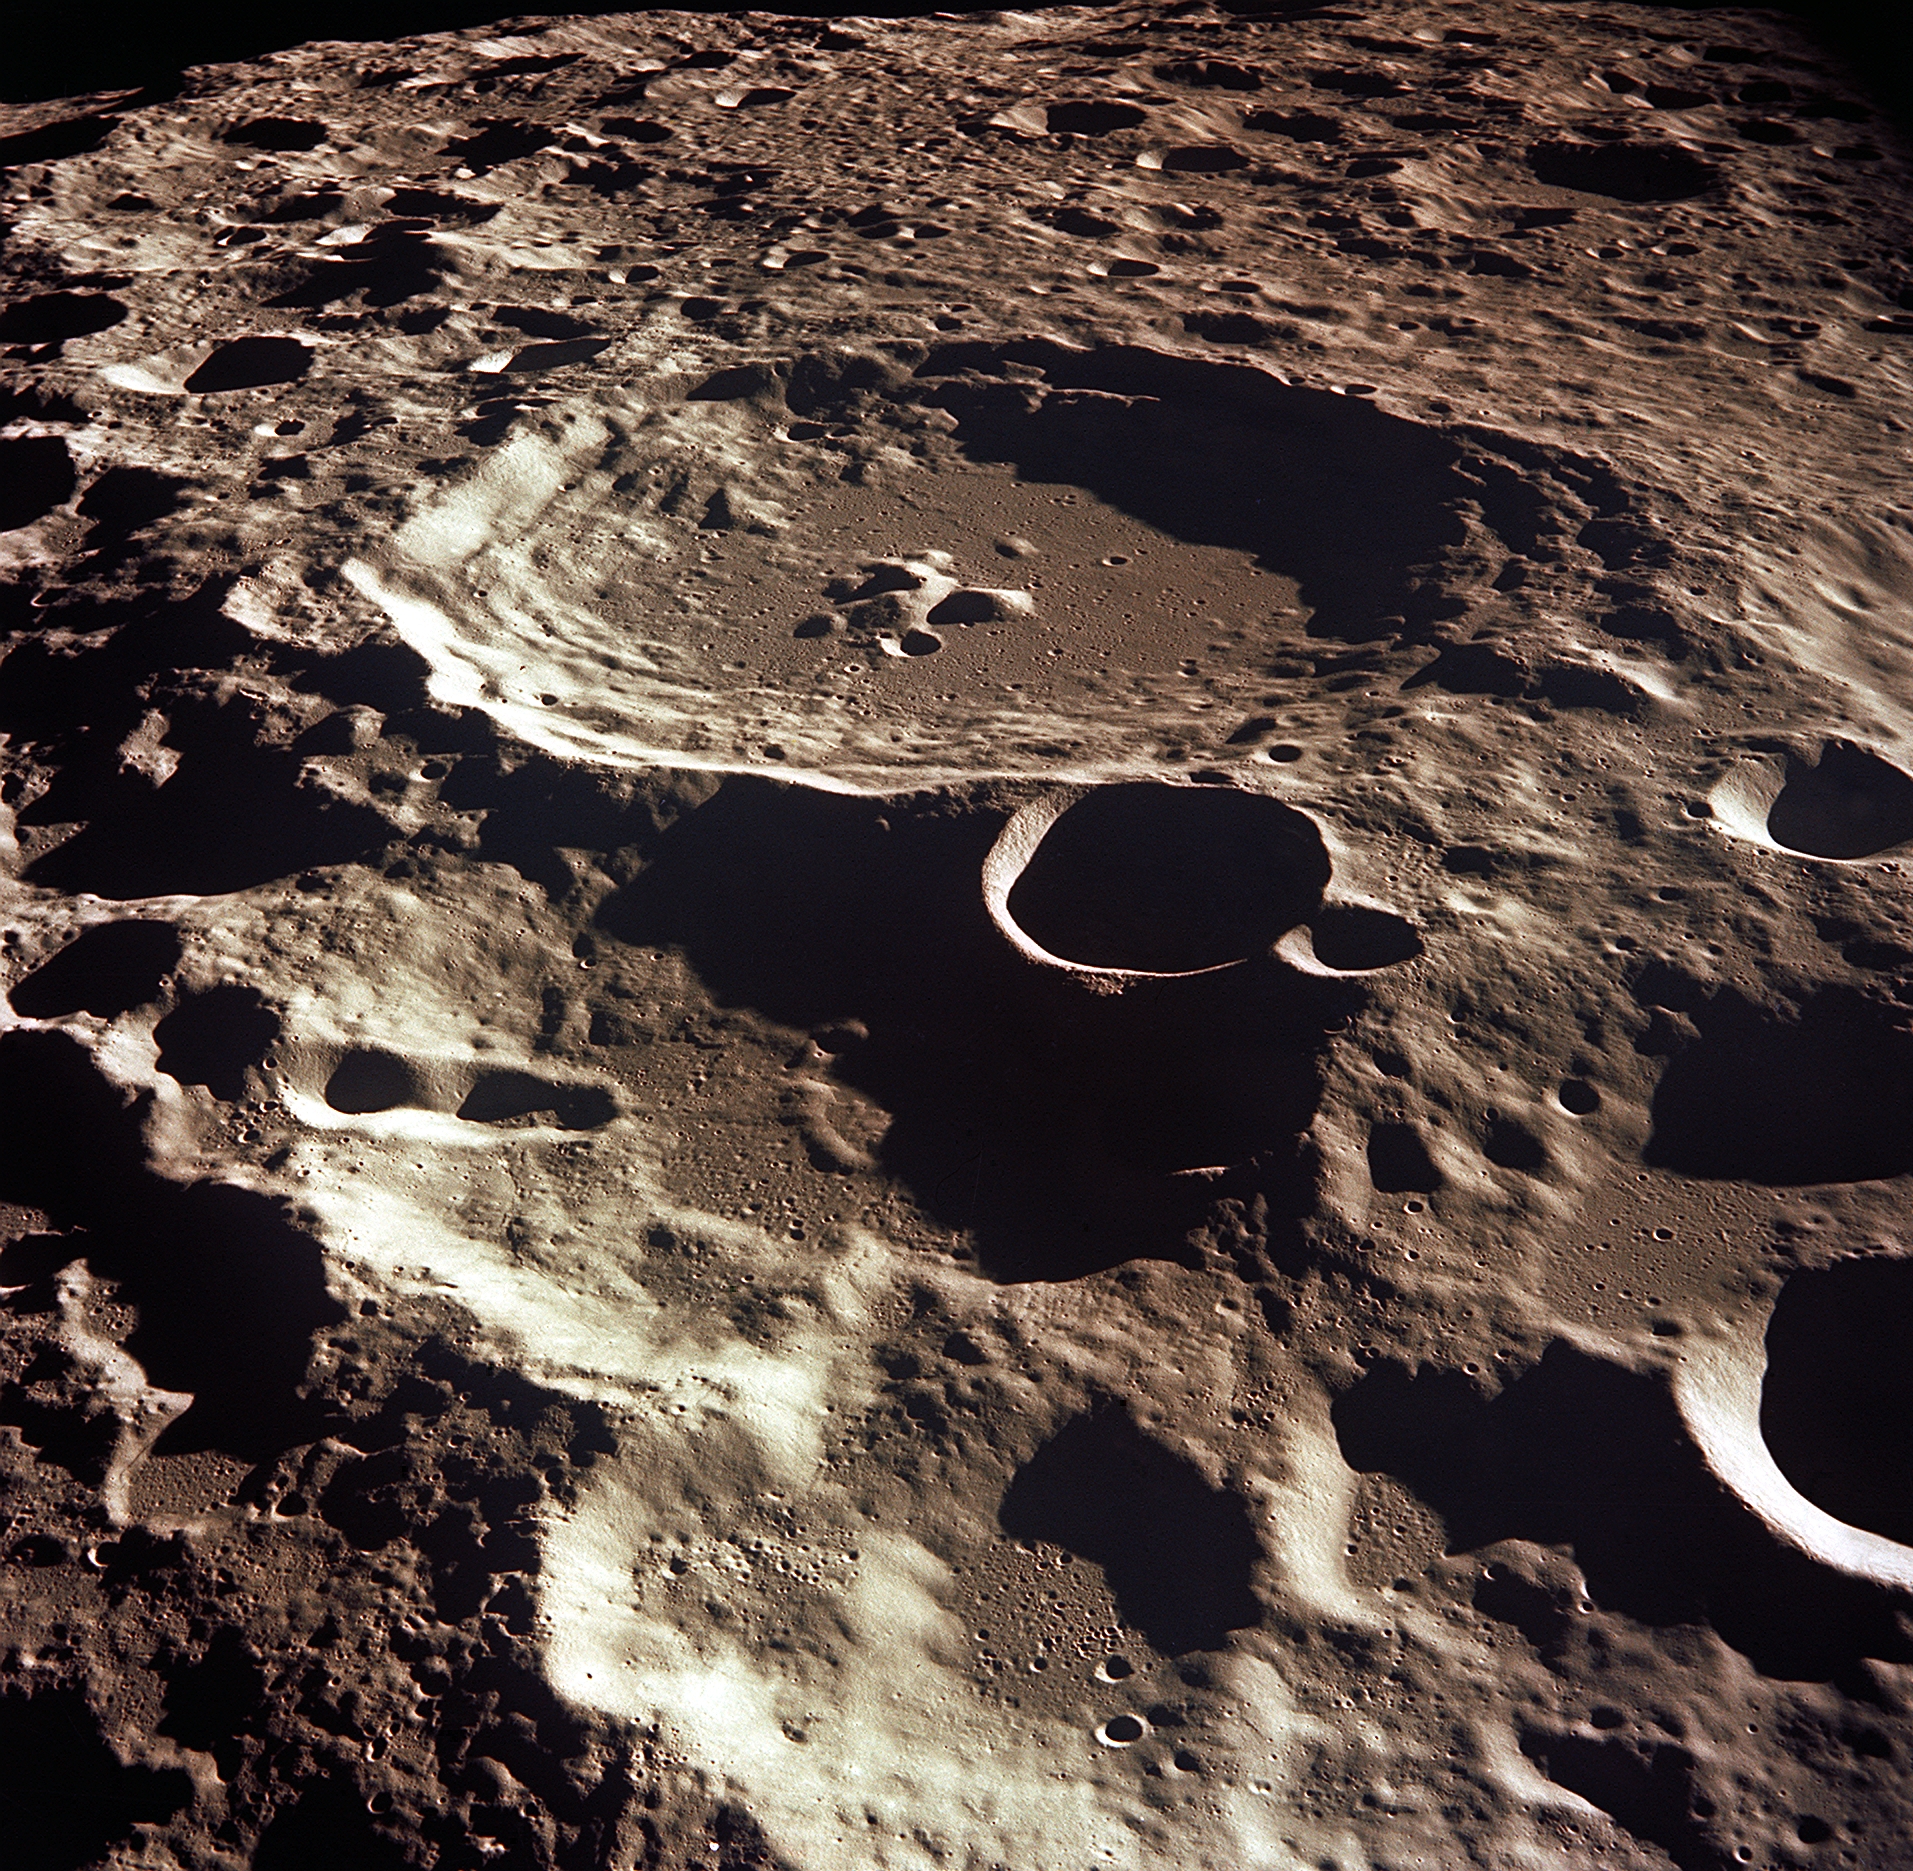 Wounded warrior: The moon has had a very rough life (NASA)